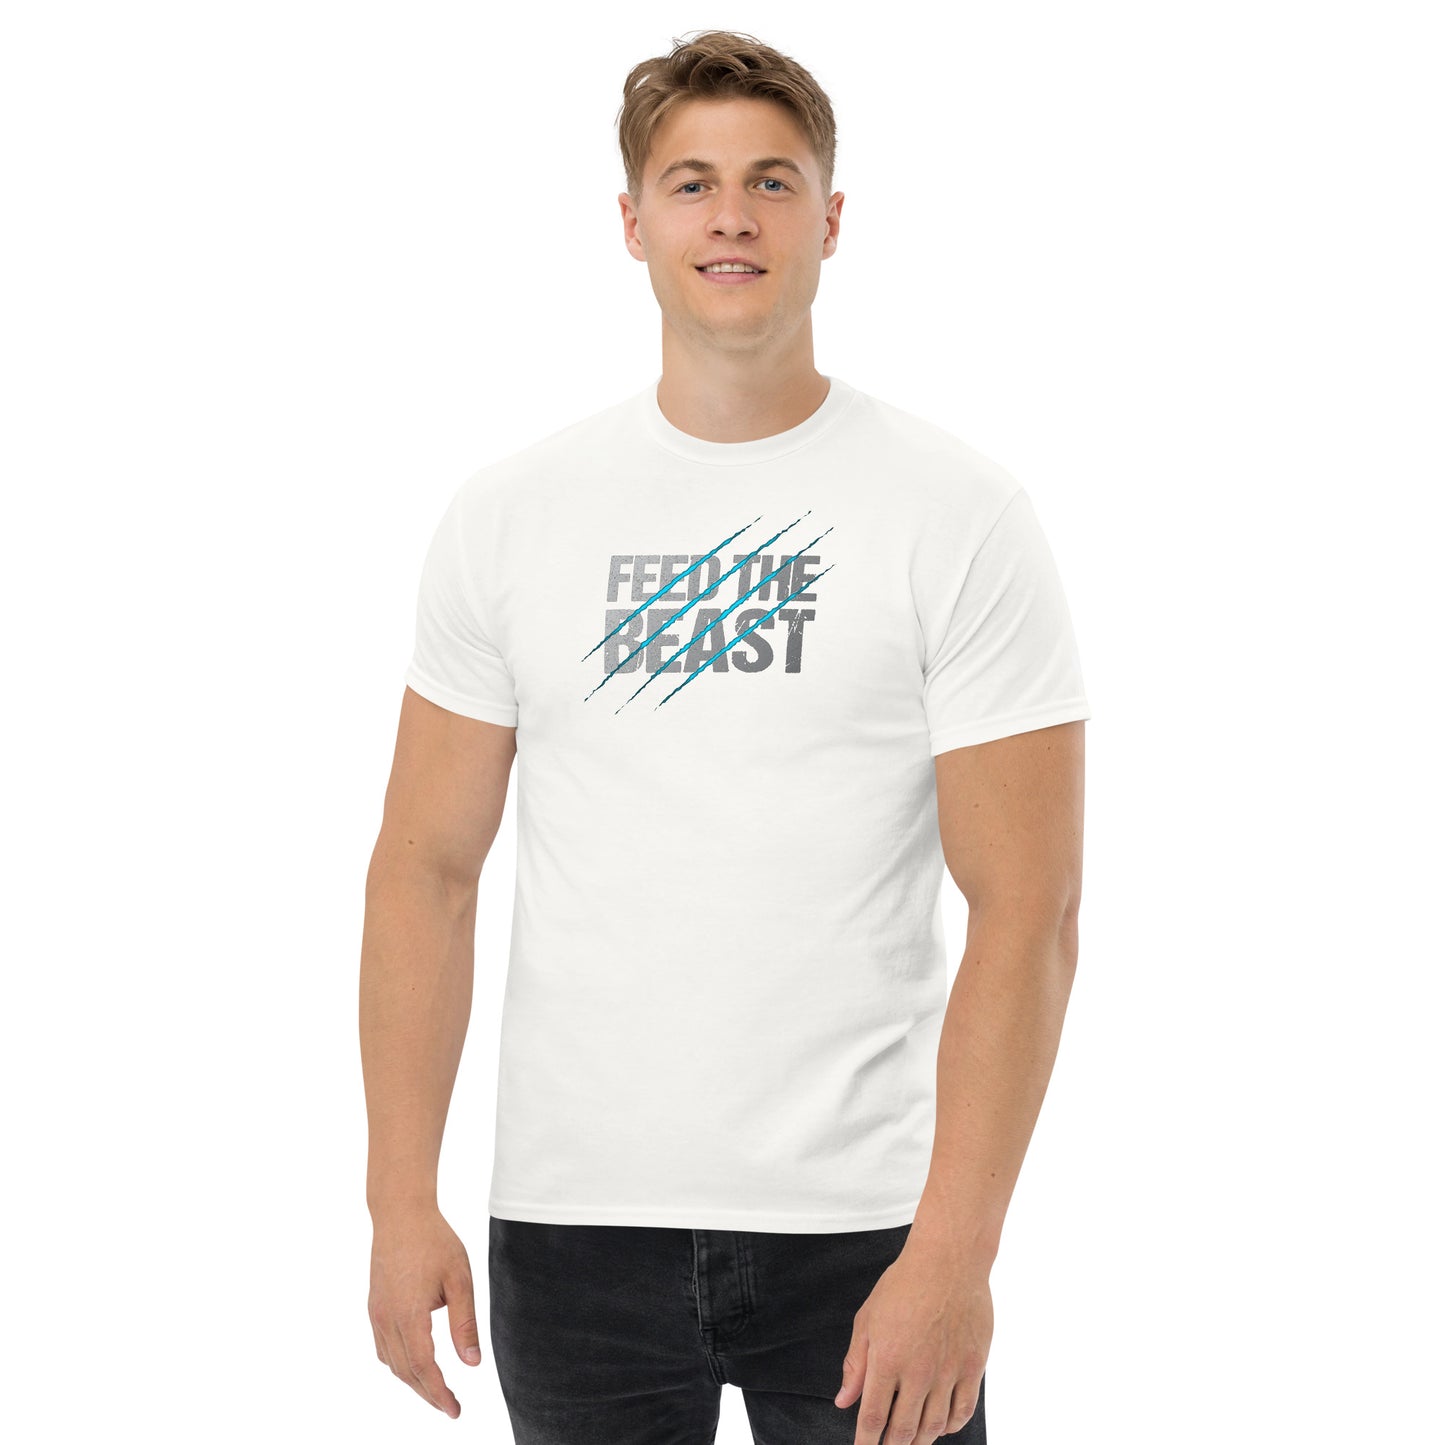 A young man with short blond hair, smiling gently and standing confidently. He is wearing a white t-shirt adorned with the words 'FEED THE BEAST' in blue and white text, accented with diagonal blue scratch marks. He pairs the t-shirt with dark jeans.